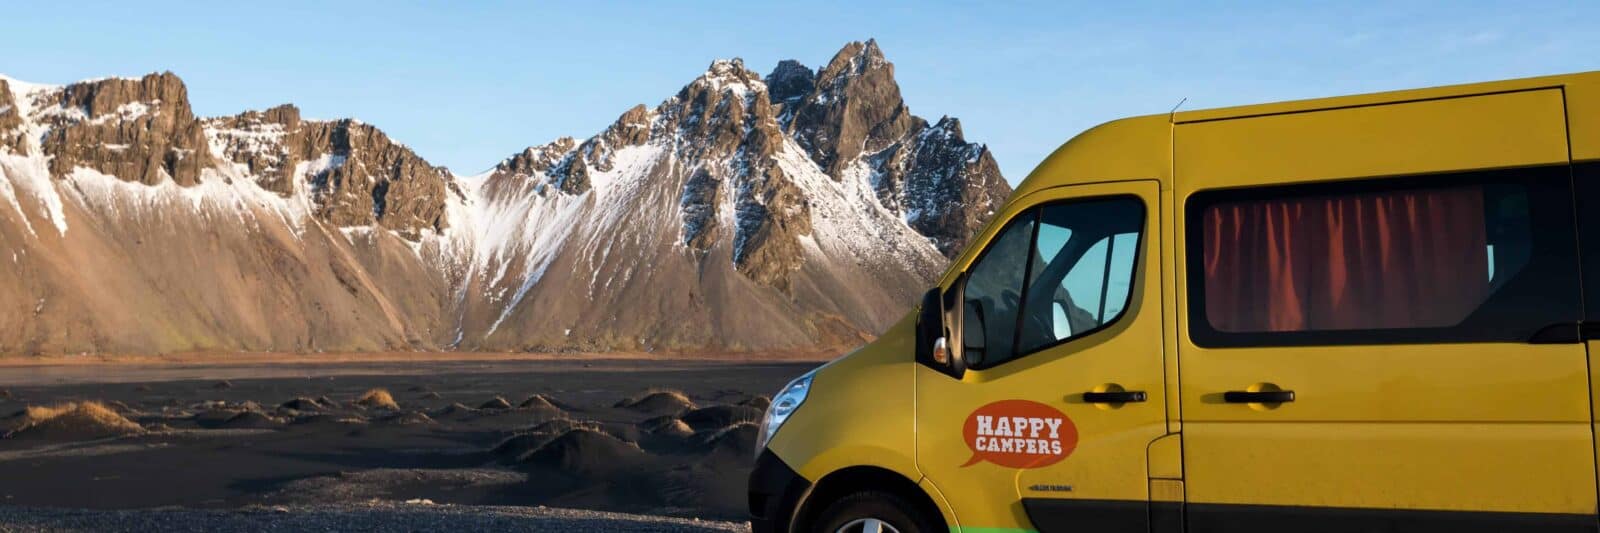 camping in iceland in a campervan | car camping in iceland